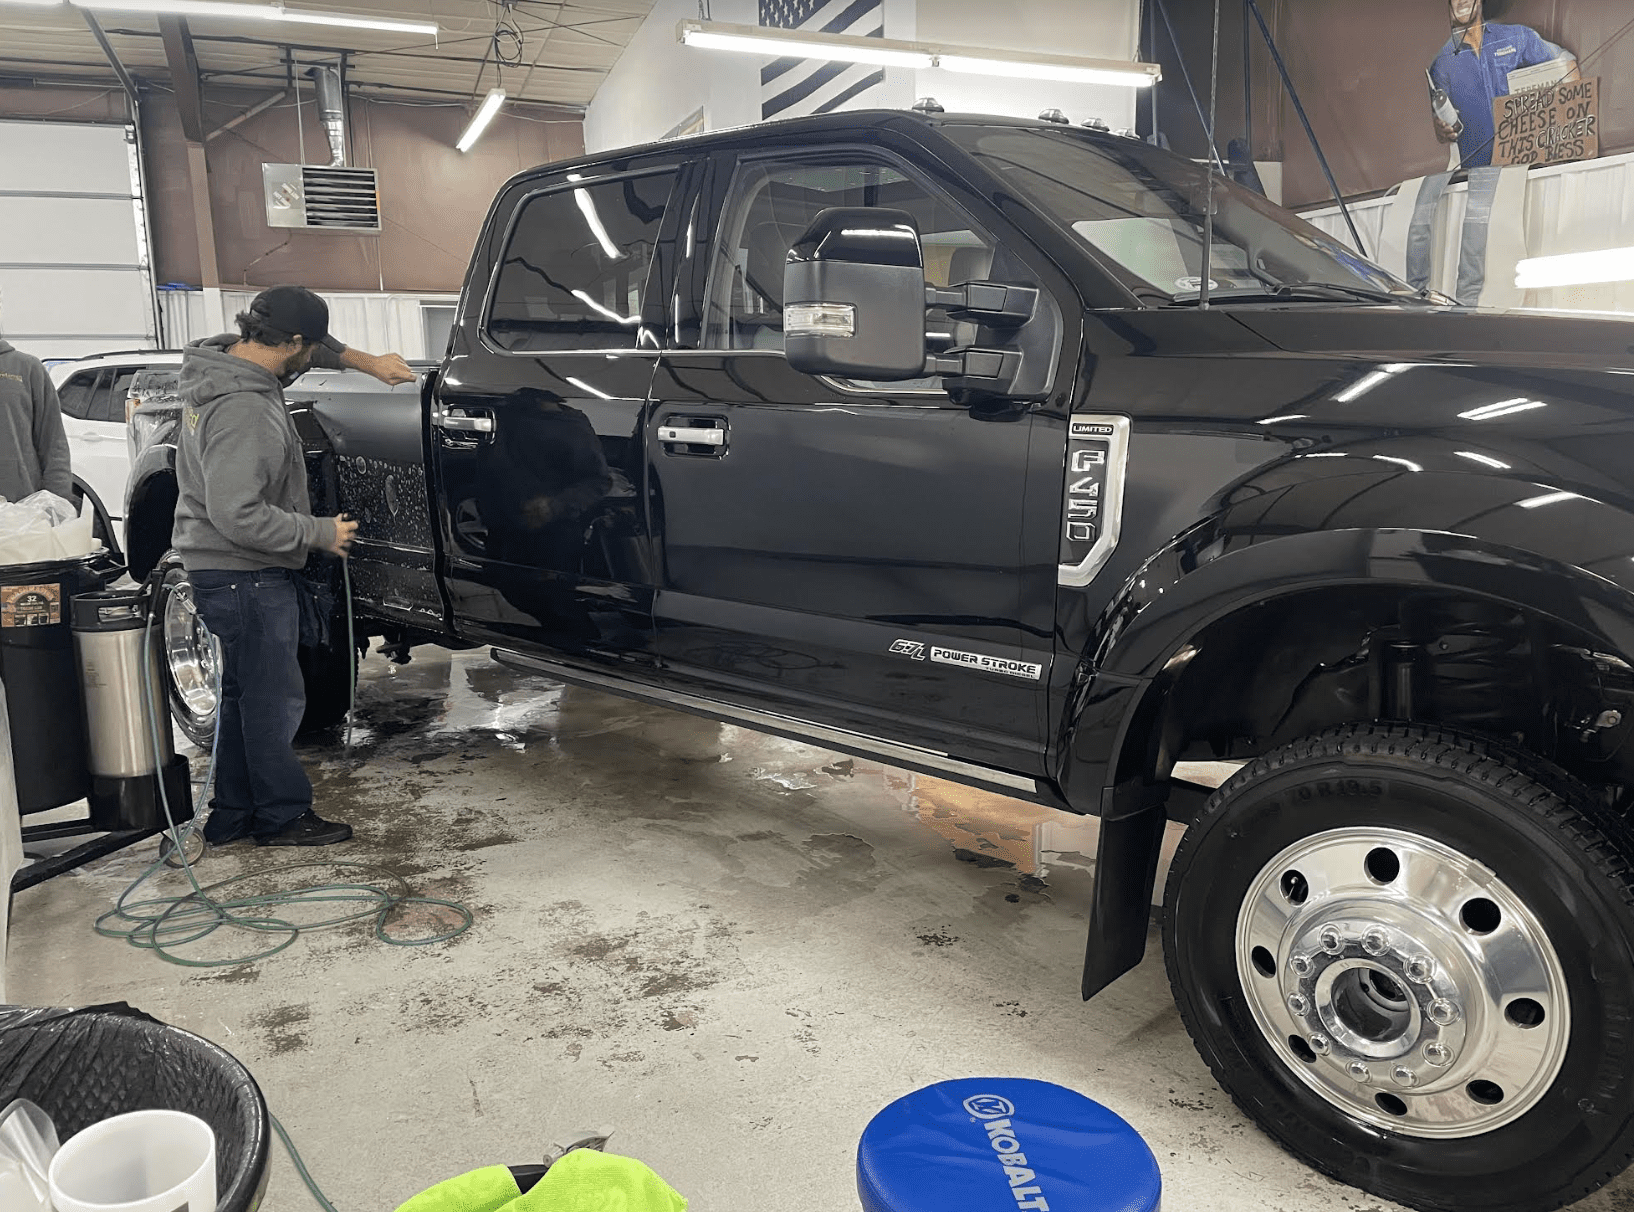 Preferred Window Tint owner putting paint protection film on truck